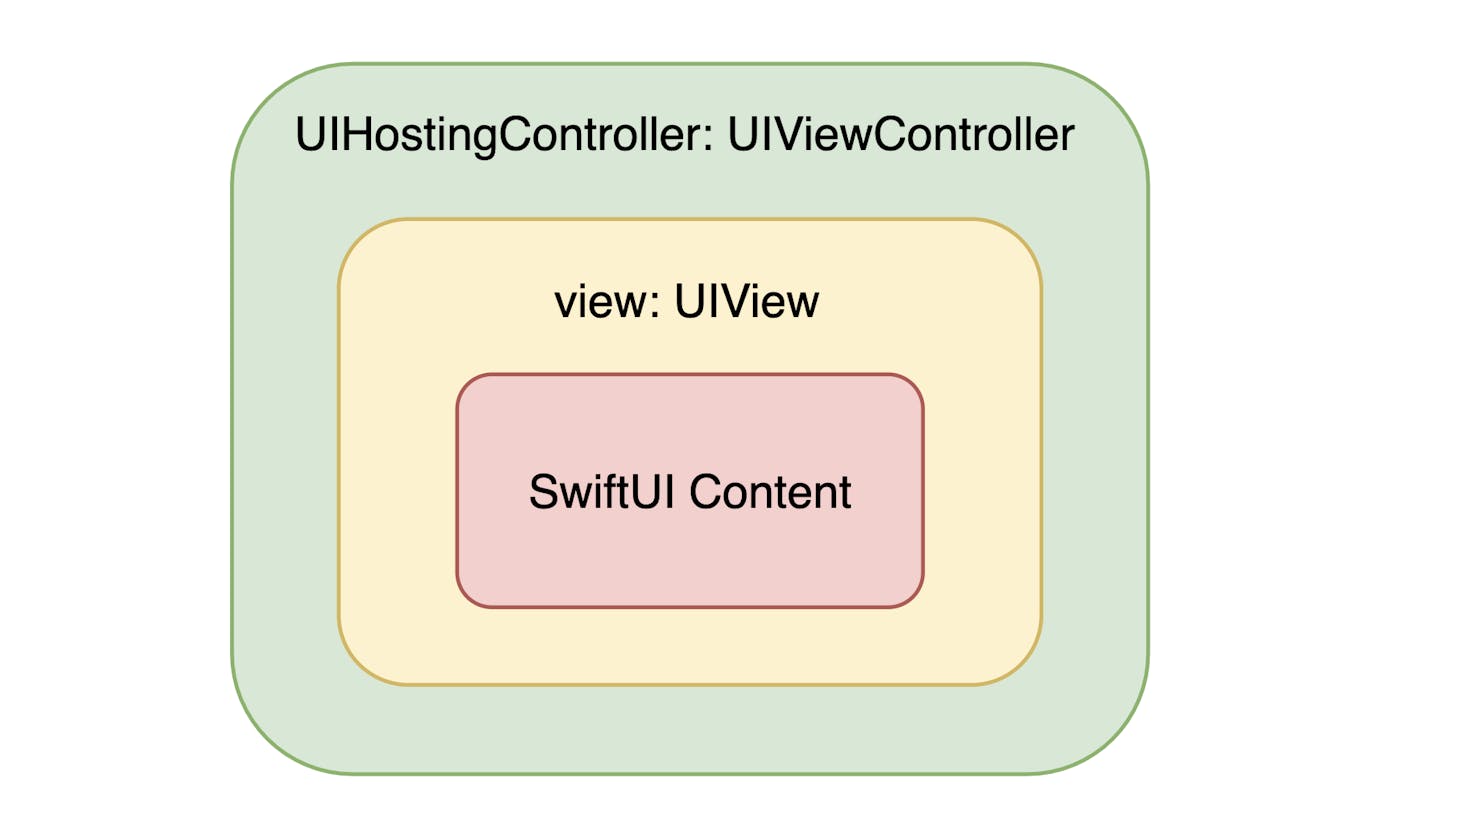 Adapting UIHostingController to changes in SwiftUI View size